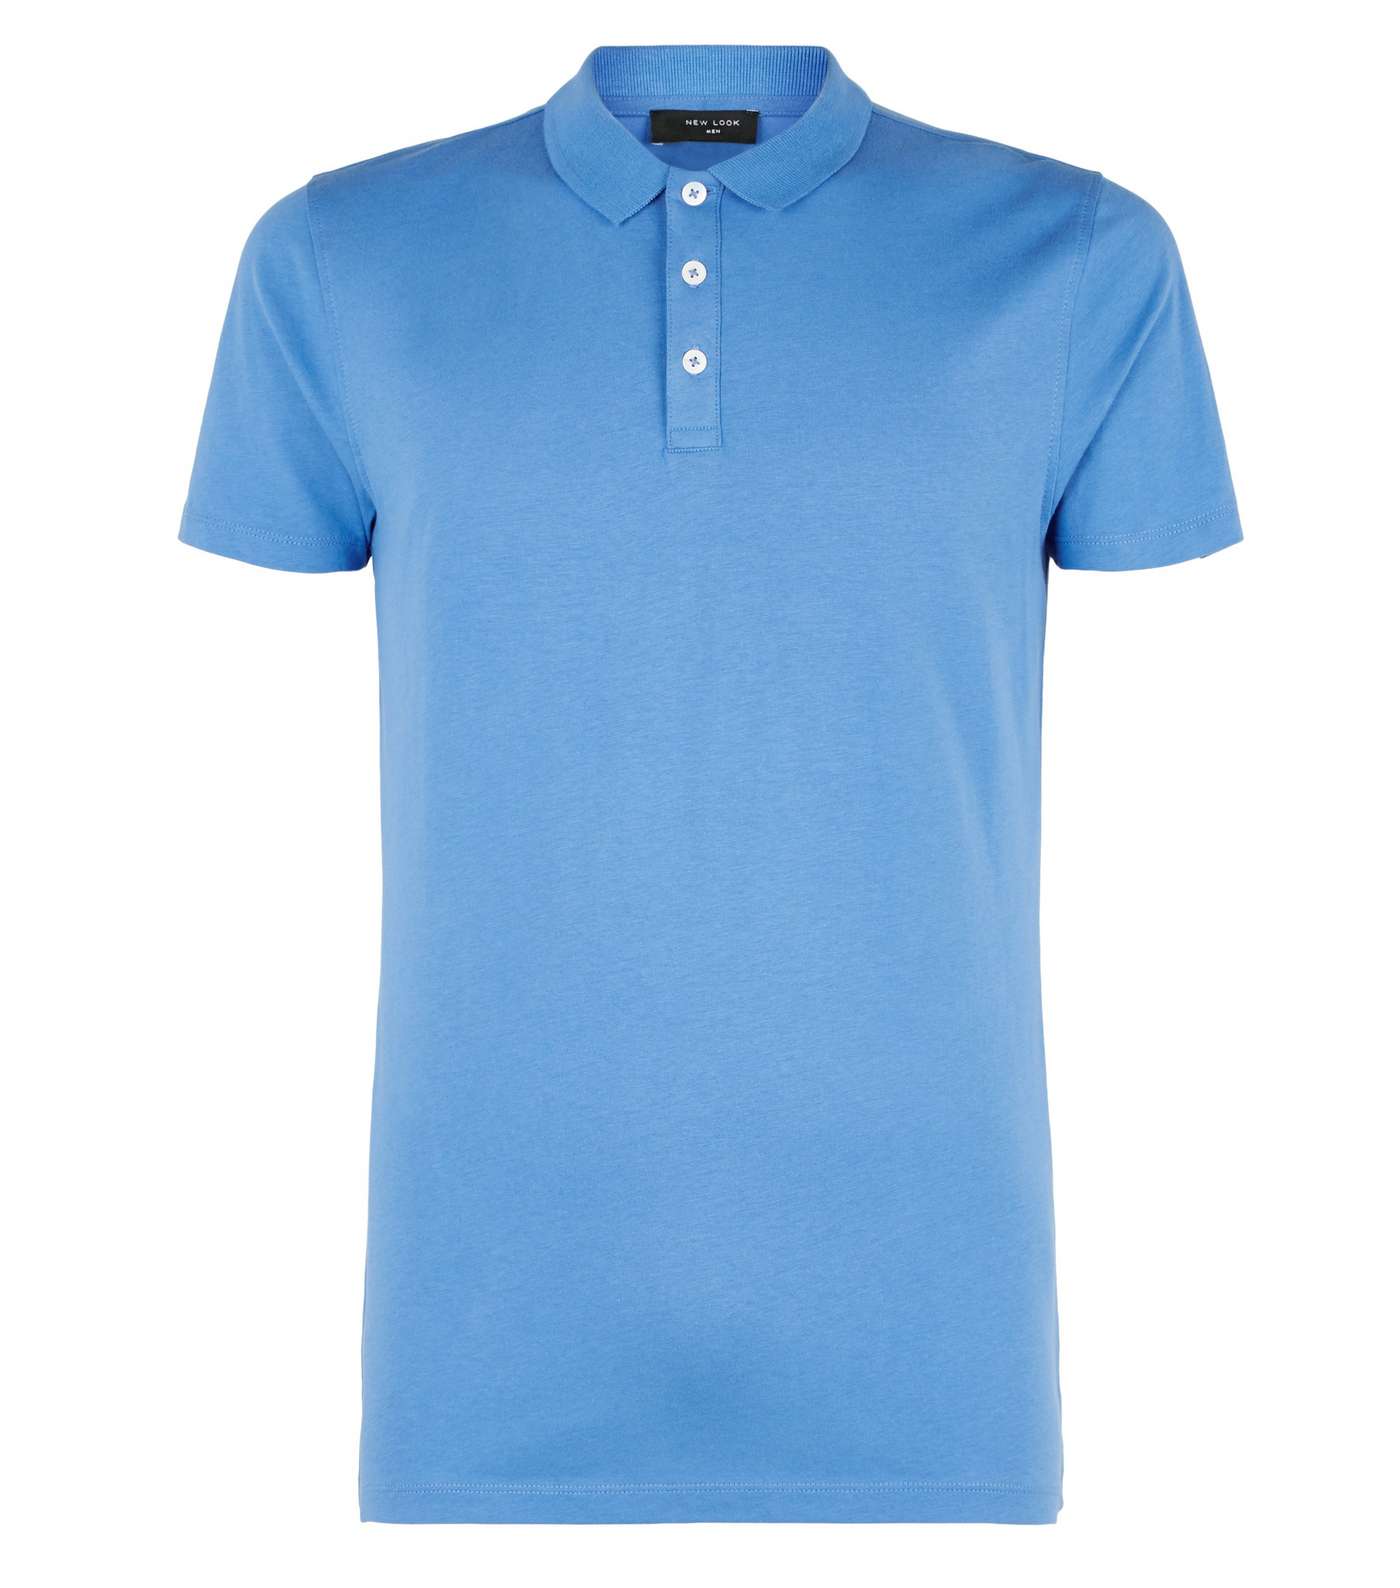 Bright Blue Muscle Fit Polo Shirt Image 4